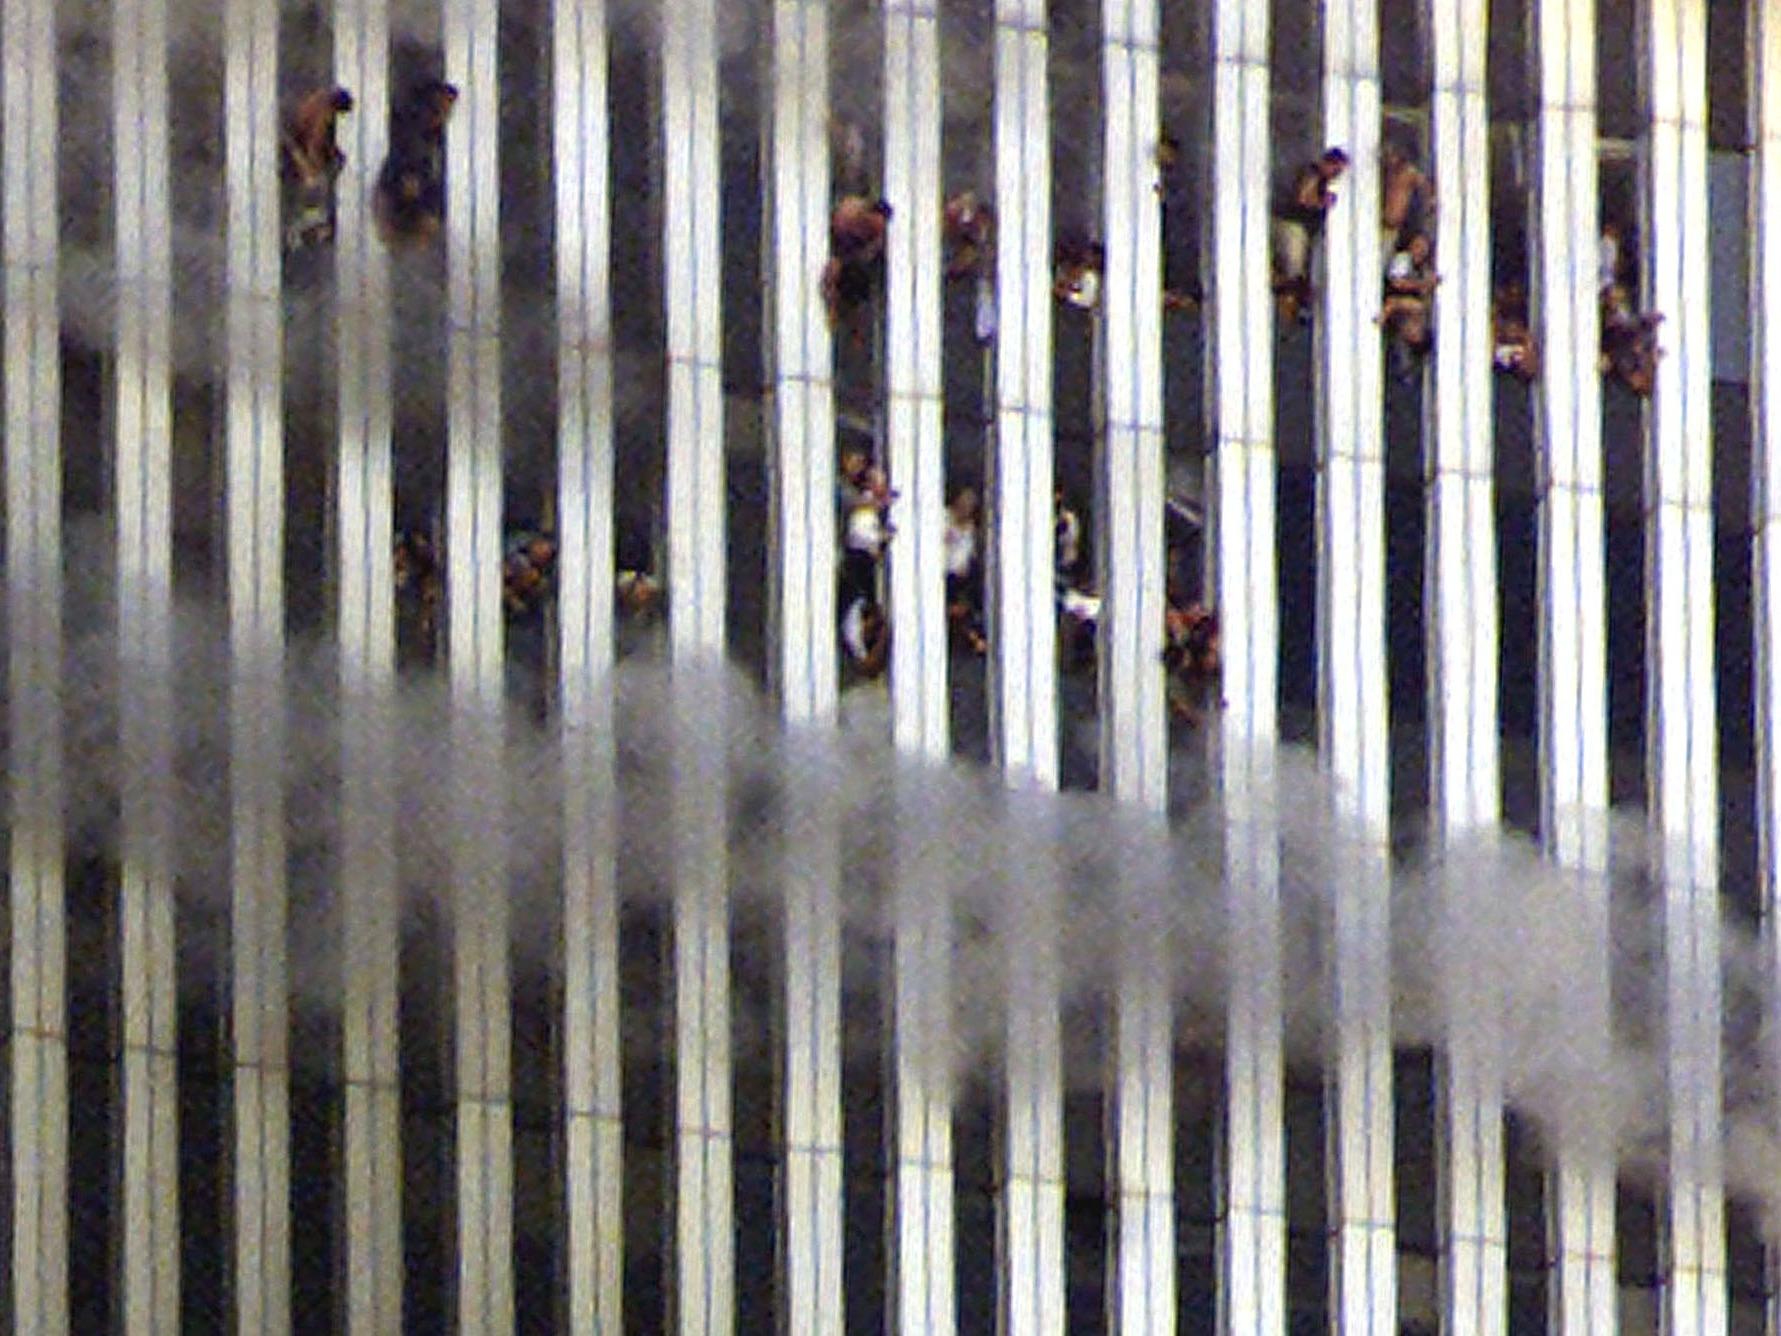 Thousands of people were trapped in upper floors of the towers. Many died when then the planes hit and many more perished as the fires raged and when the towers collapsed. Some jumped to their deaths to escape the conflagration and the smoke. In all, 2,606 people died in the towers.